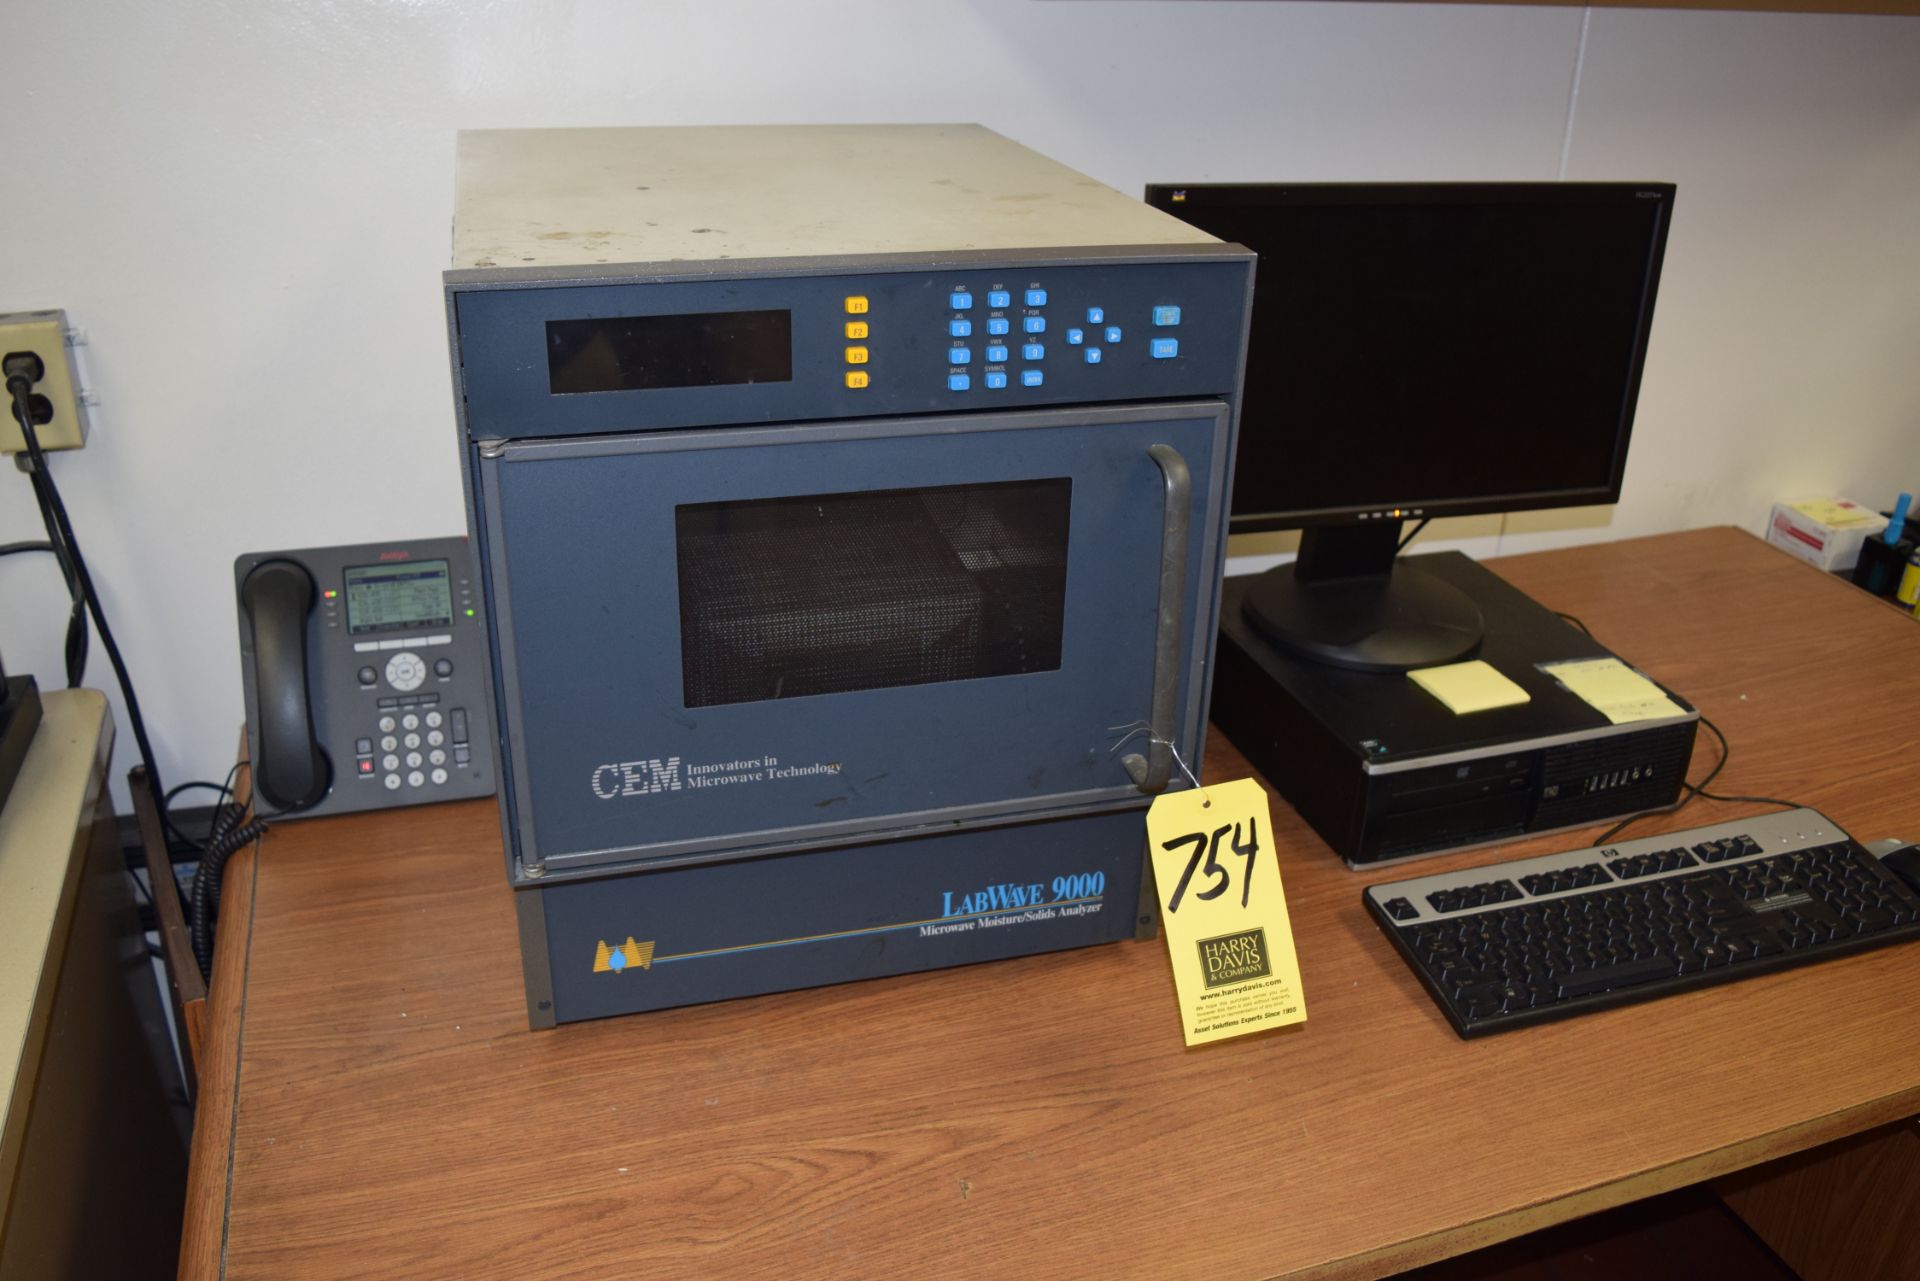 CEM Microwave Moisture/Solids Analyzer Model Labware 9000, SN: 900800 Rigging Charge: $25